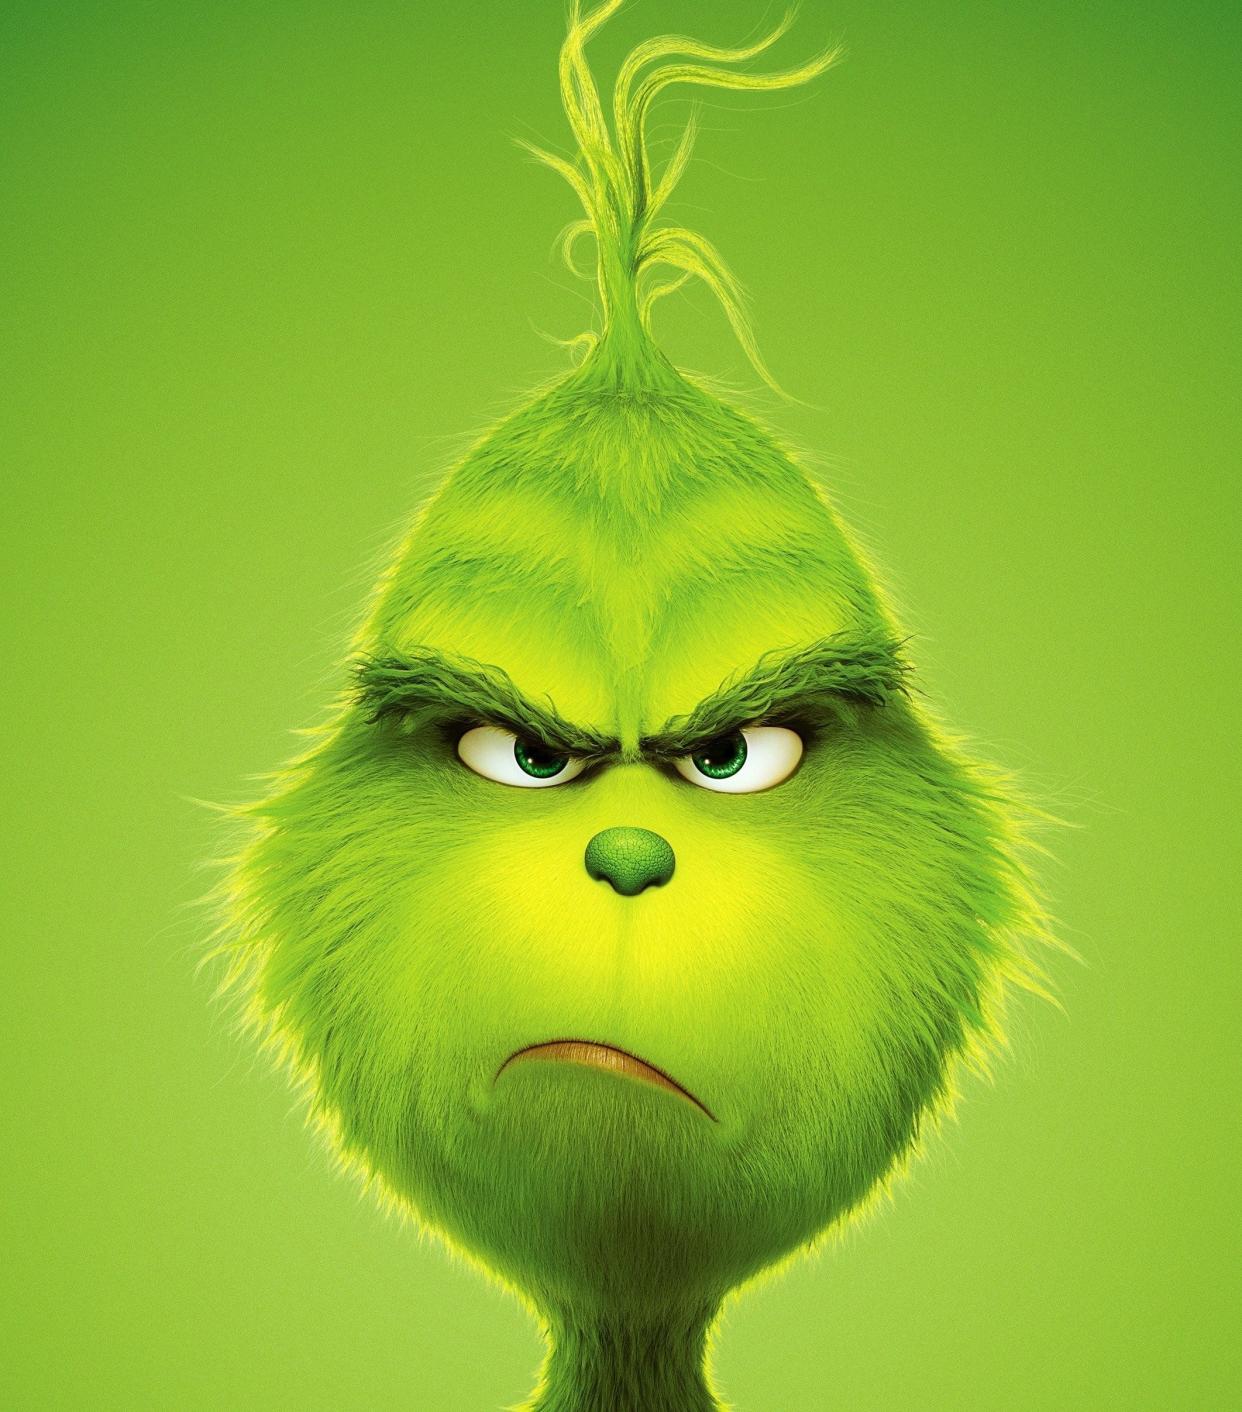 The Grinch -- one of the great Christmas cynics